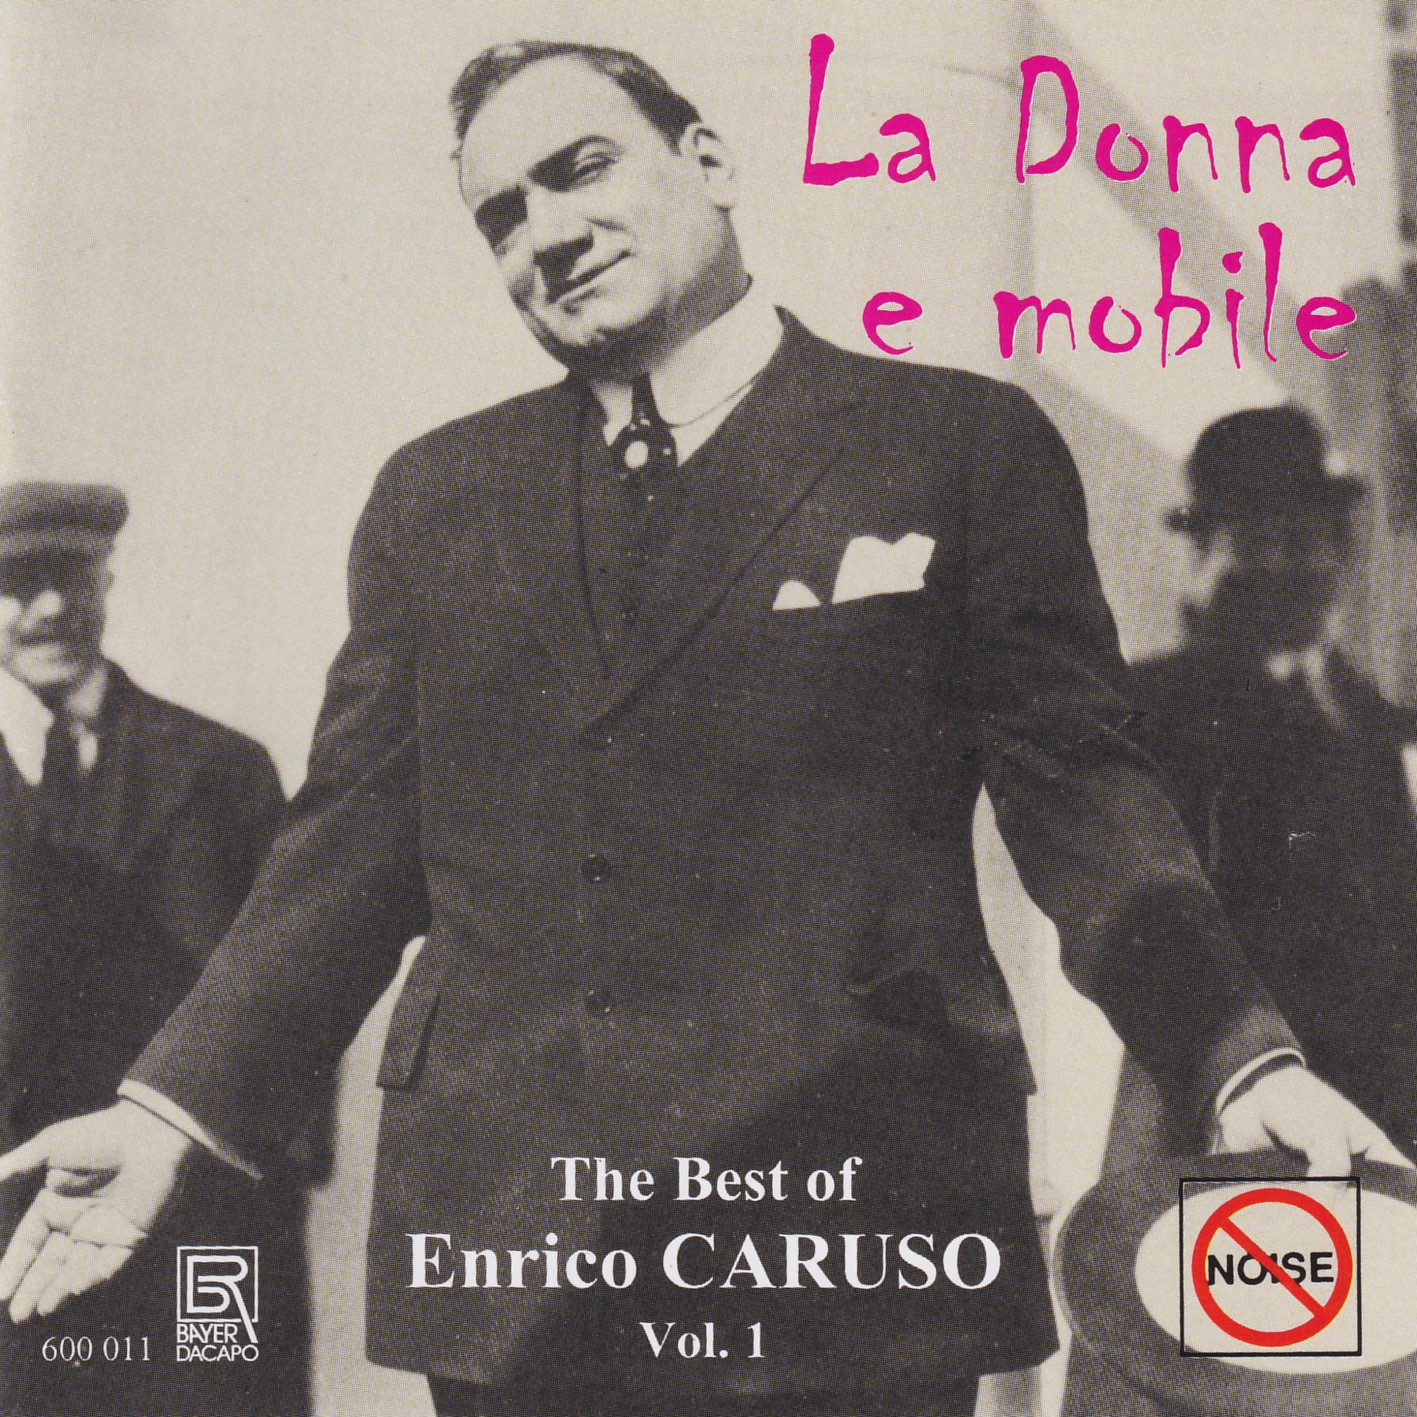 The Best of Enrico Caruso Vol.1